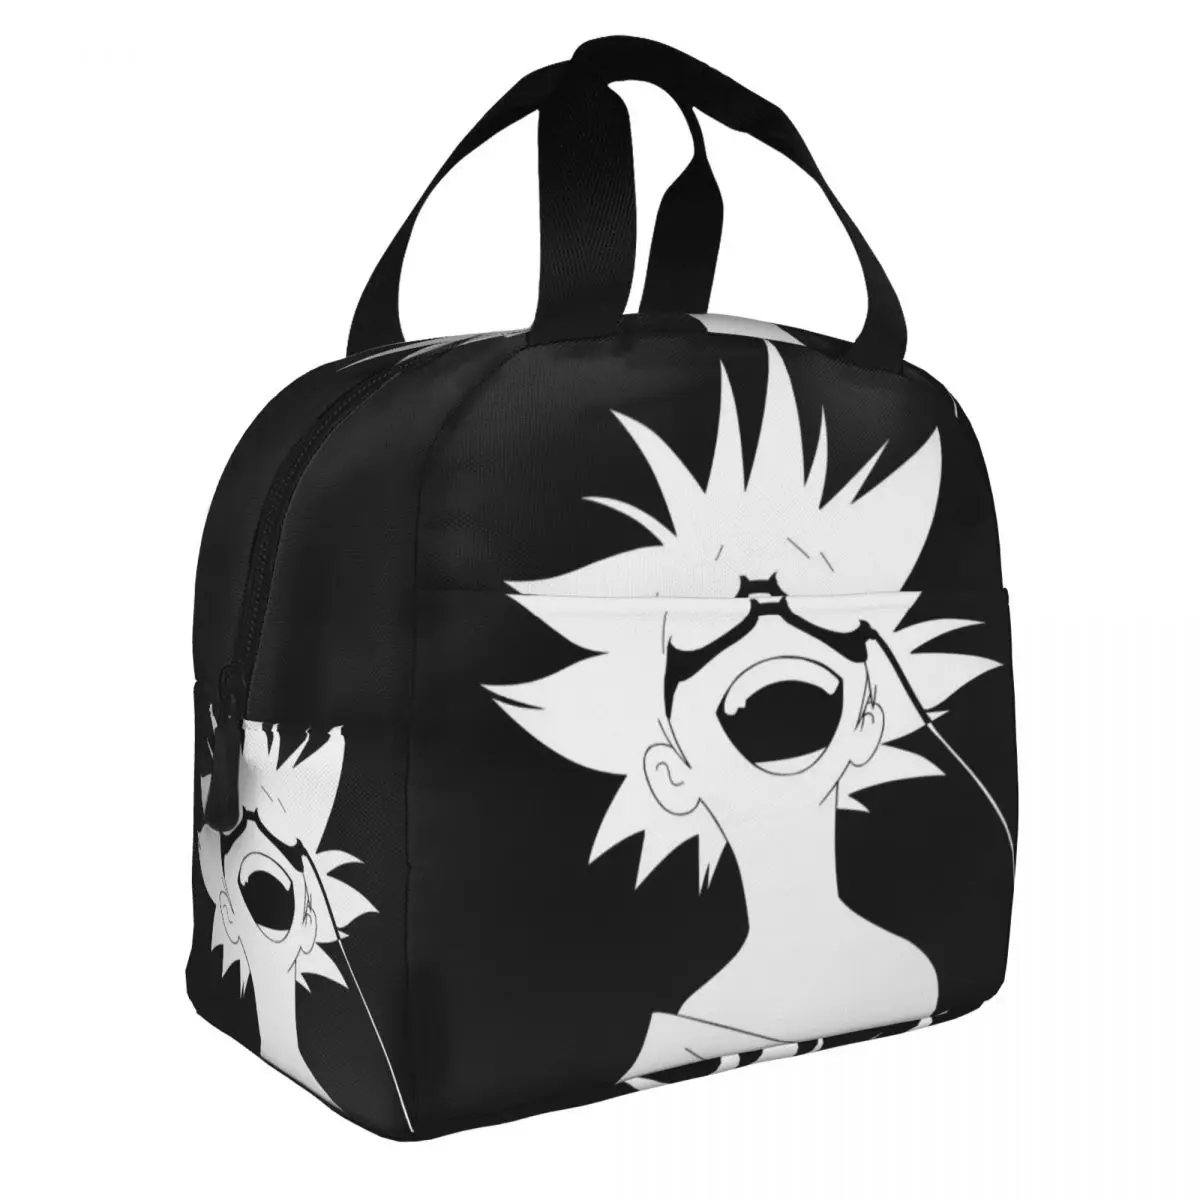 Anime - Cowboy Bebop Lunch Bento Bags Portable Aluminum Foil thickened Thermal Cloth Lunch Bag for Women Men Boy